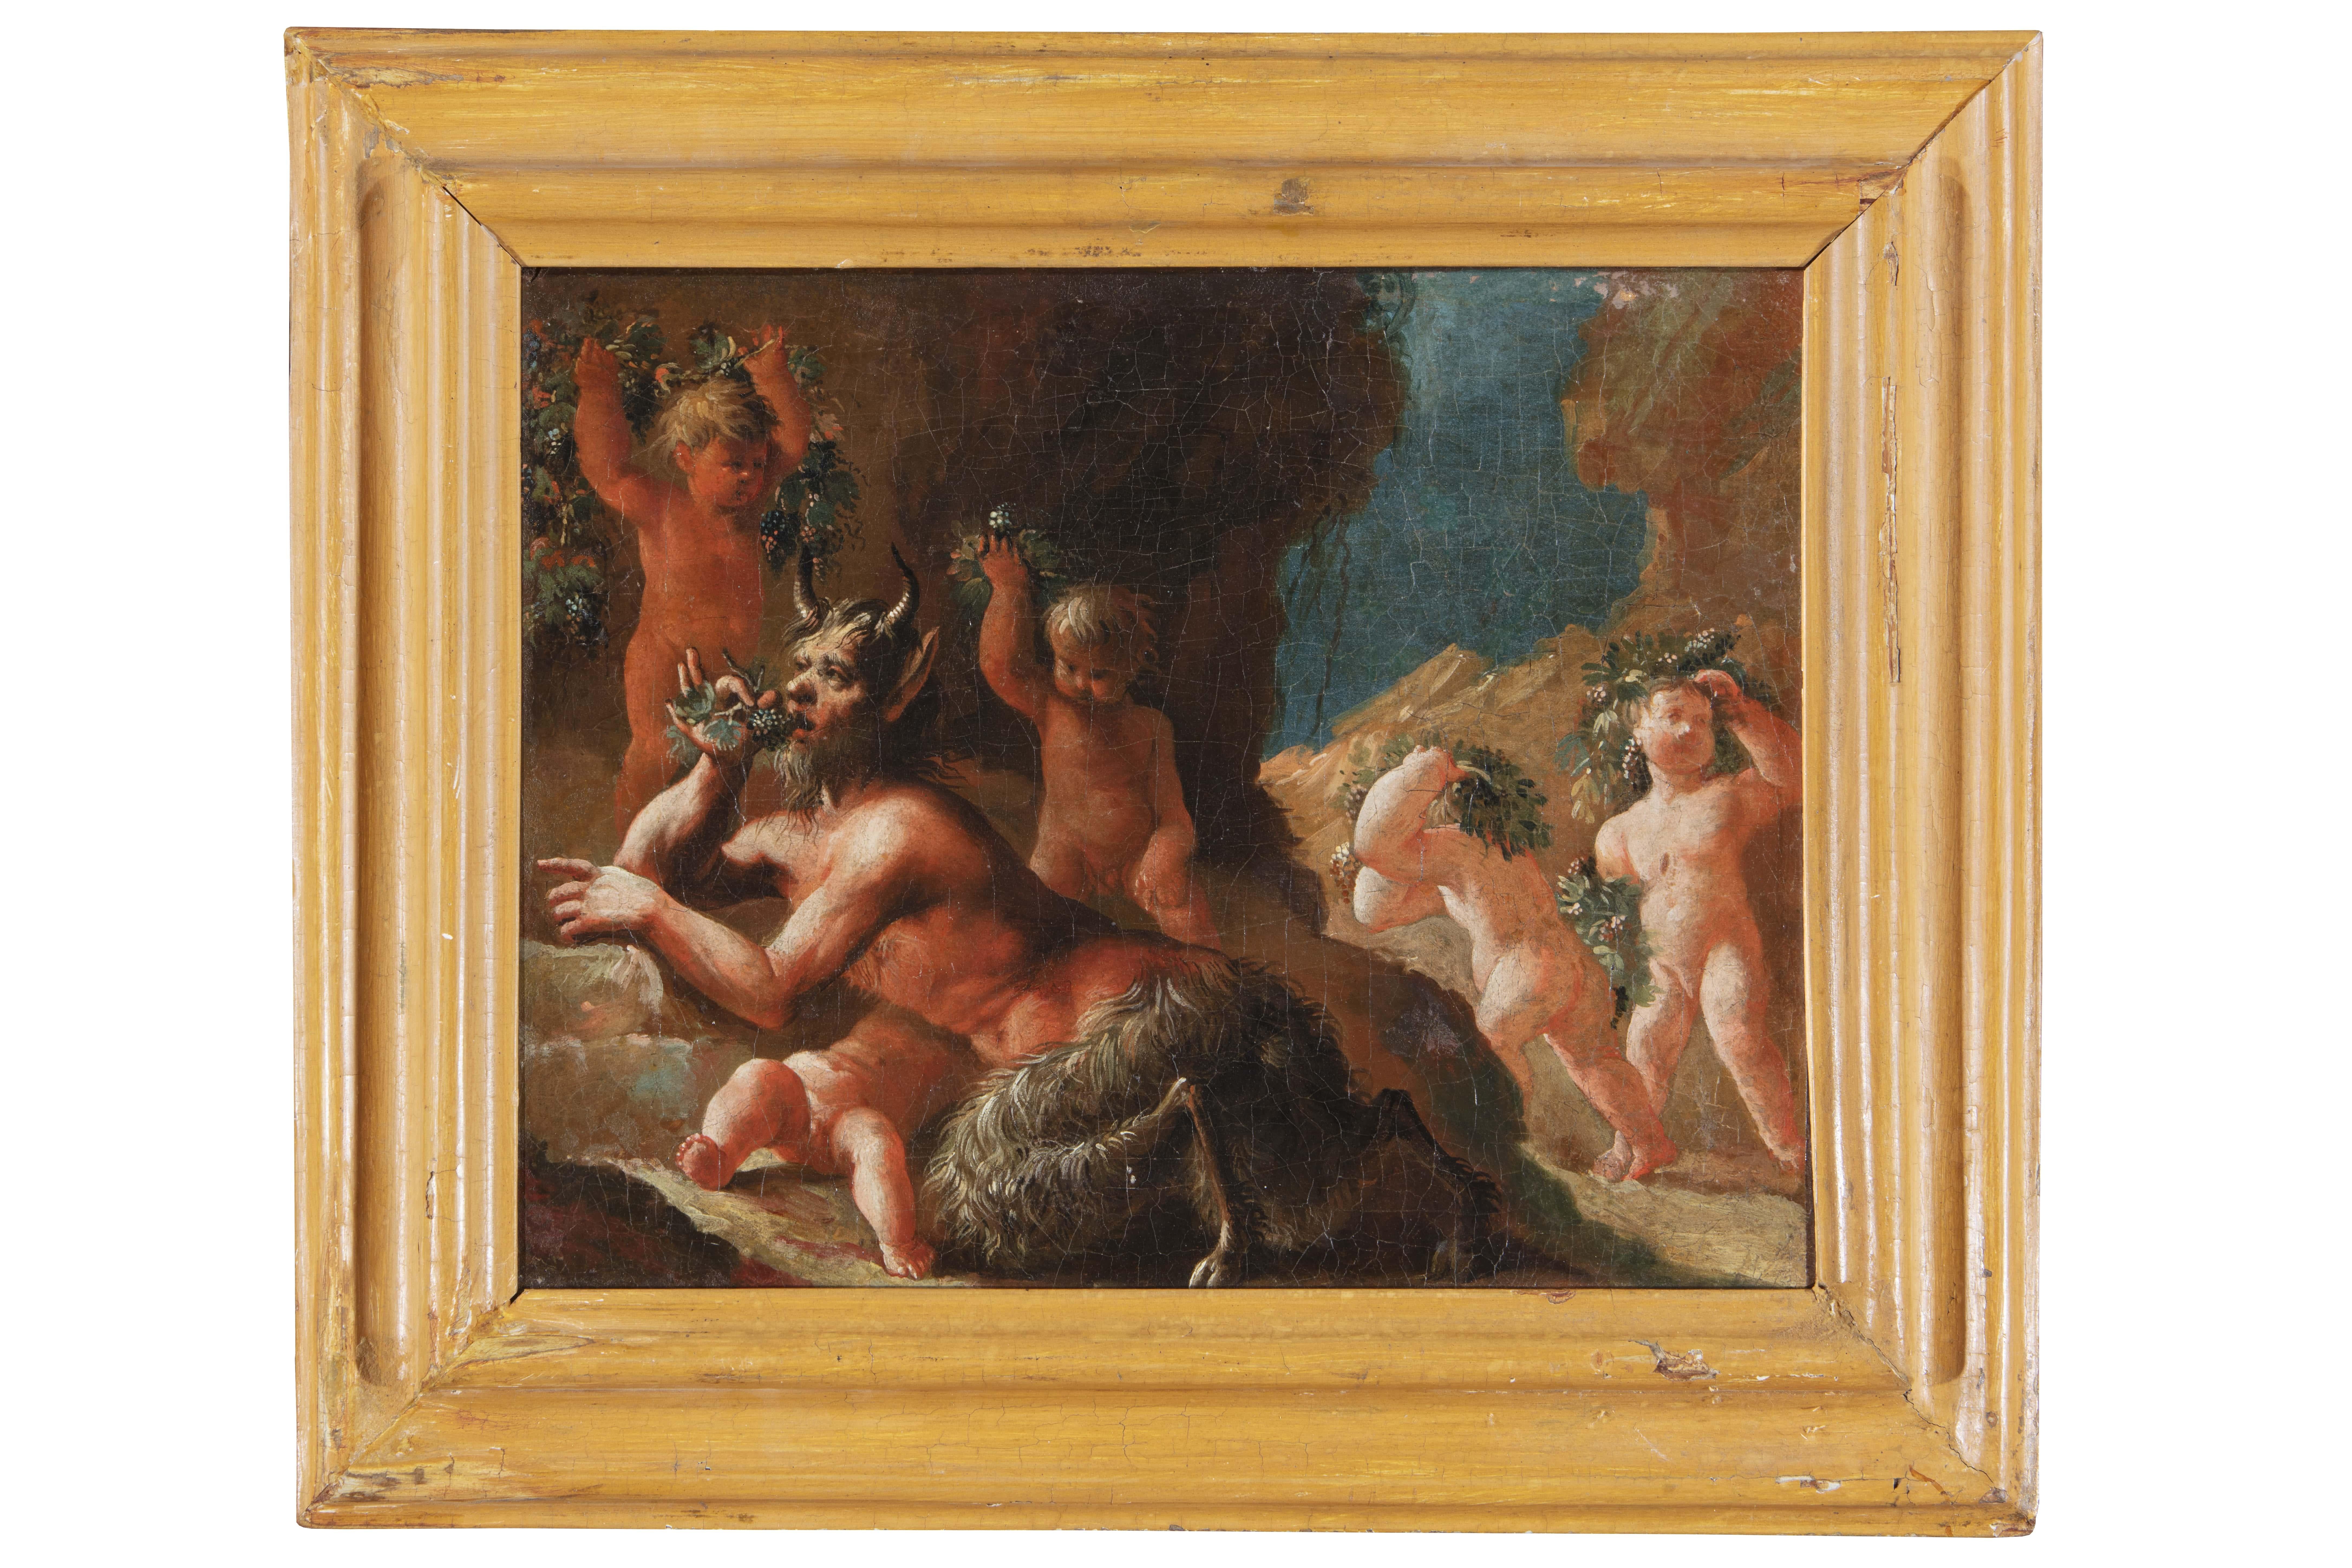 18th century By French maestro Bacchanal Oil on canvas